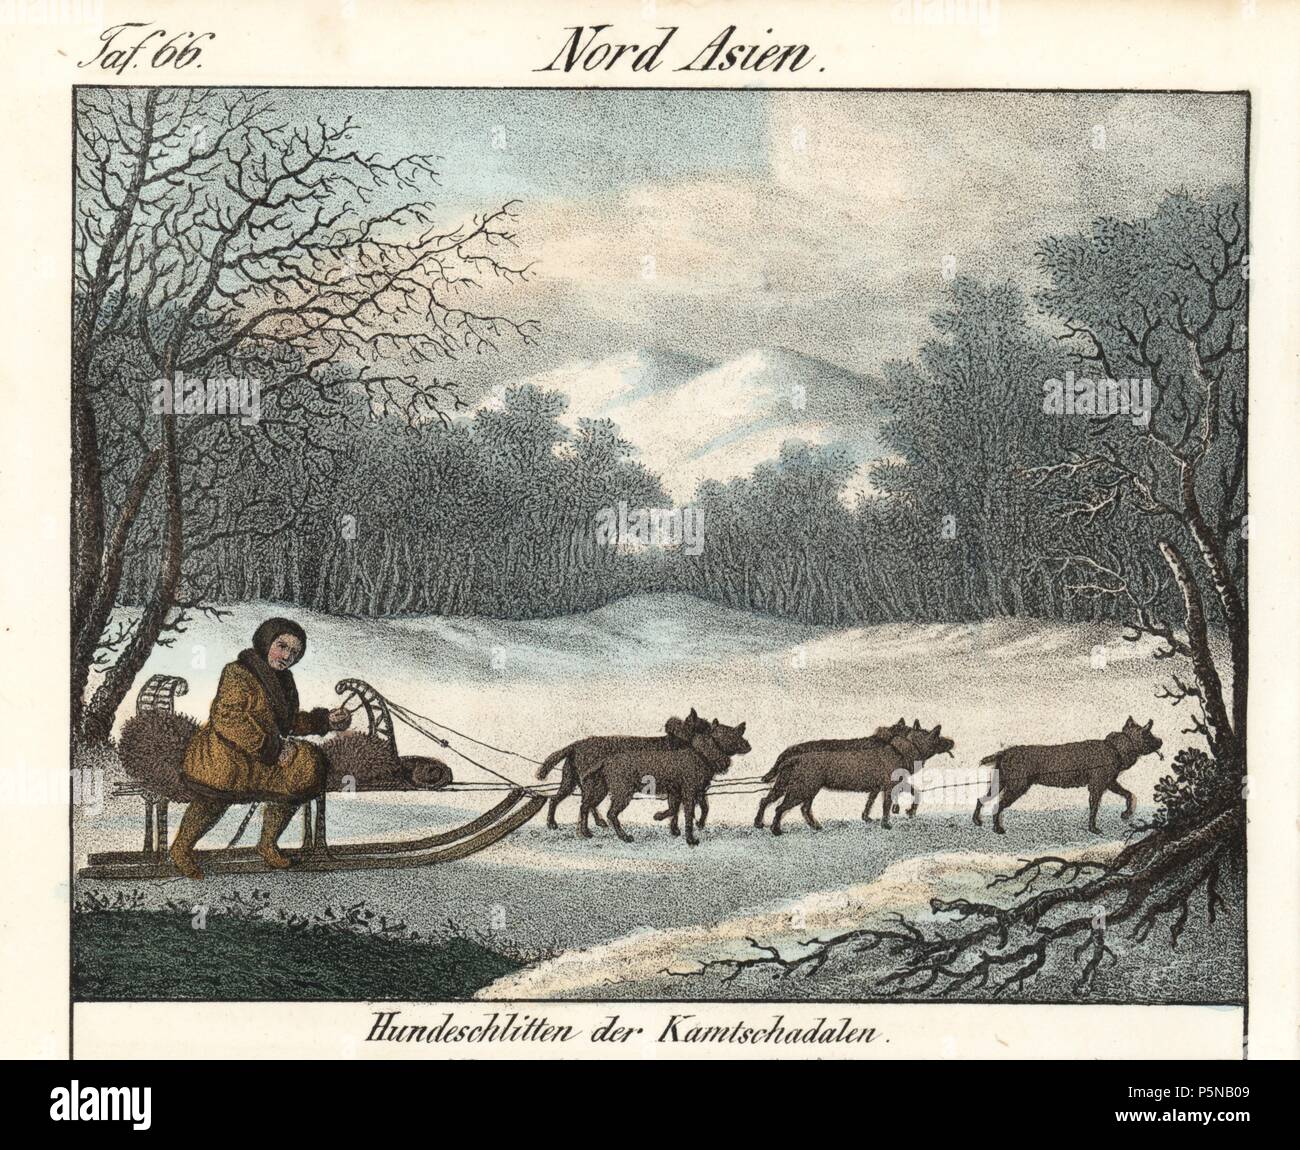 Itelmen man in fur-lined clothes riding a dogsled driven by five dogs in Kamchatka. Handcoloured lithograph from Friedrich Wilhelm Goedsche's 'Vollstaendige Völkergallerie in getreuen Abbildungen' (Complete Gallery of Peoples in True Pictures), Meissen, circa 1835-1840. Goedsche (1785-1863) was a German writer, bookseller and publisher in Meissen. Many of the illustrations were adapted from Bertuch's 'Bilderbuch fur Kinder' and others. Stock Photo